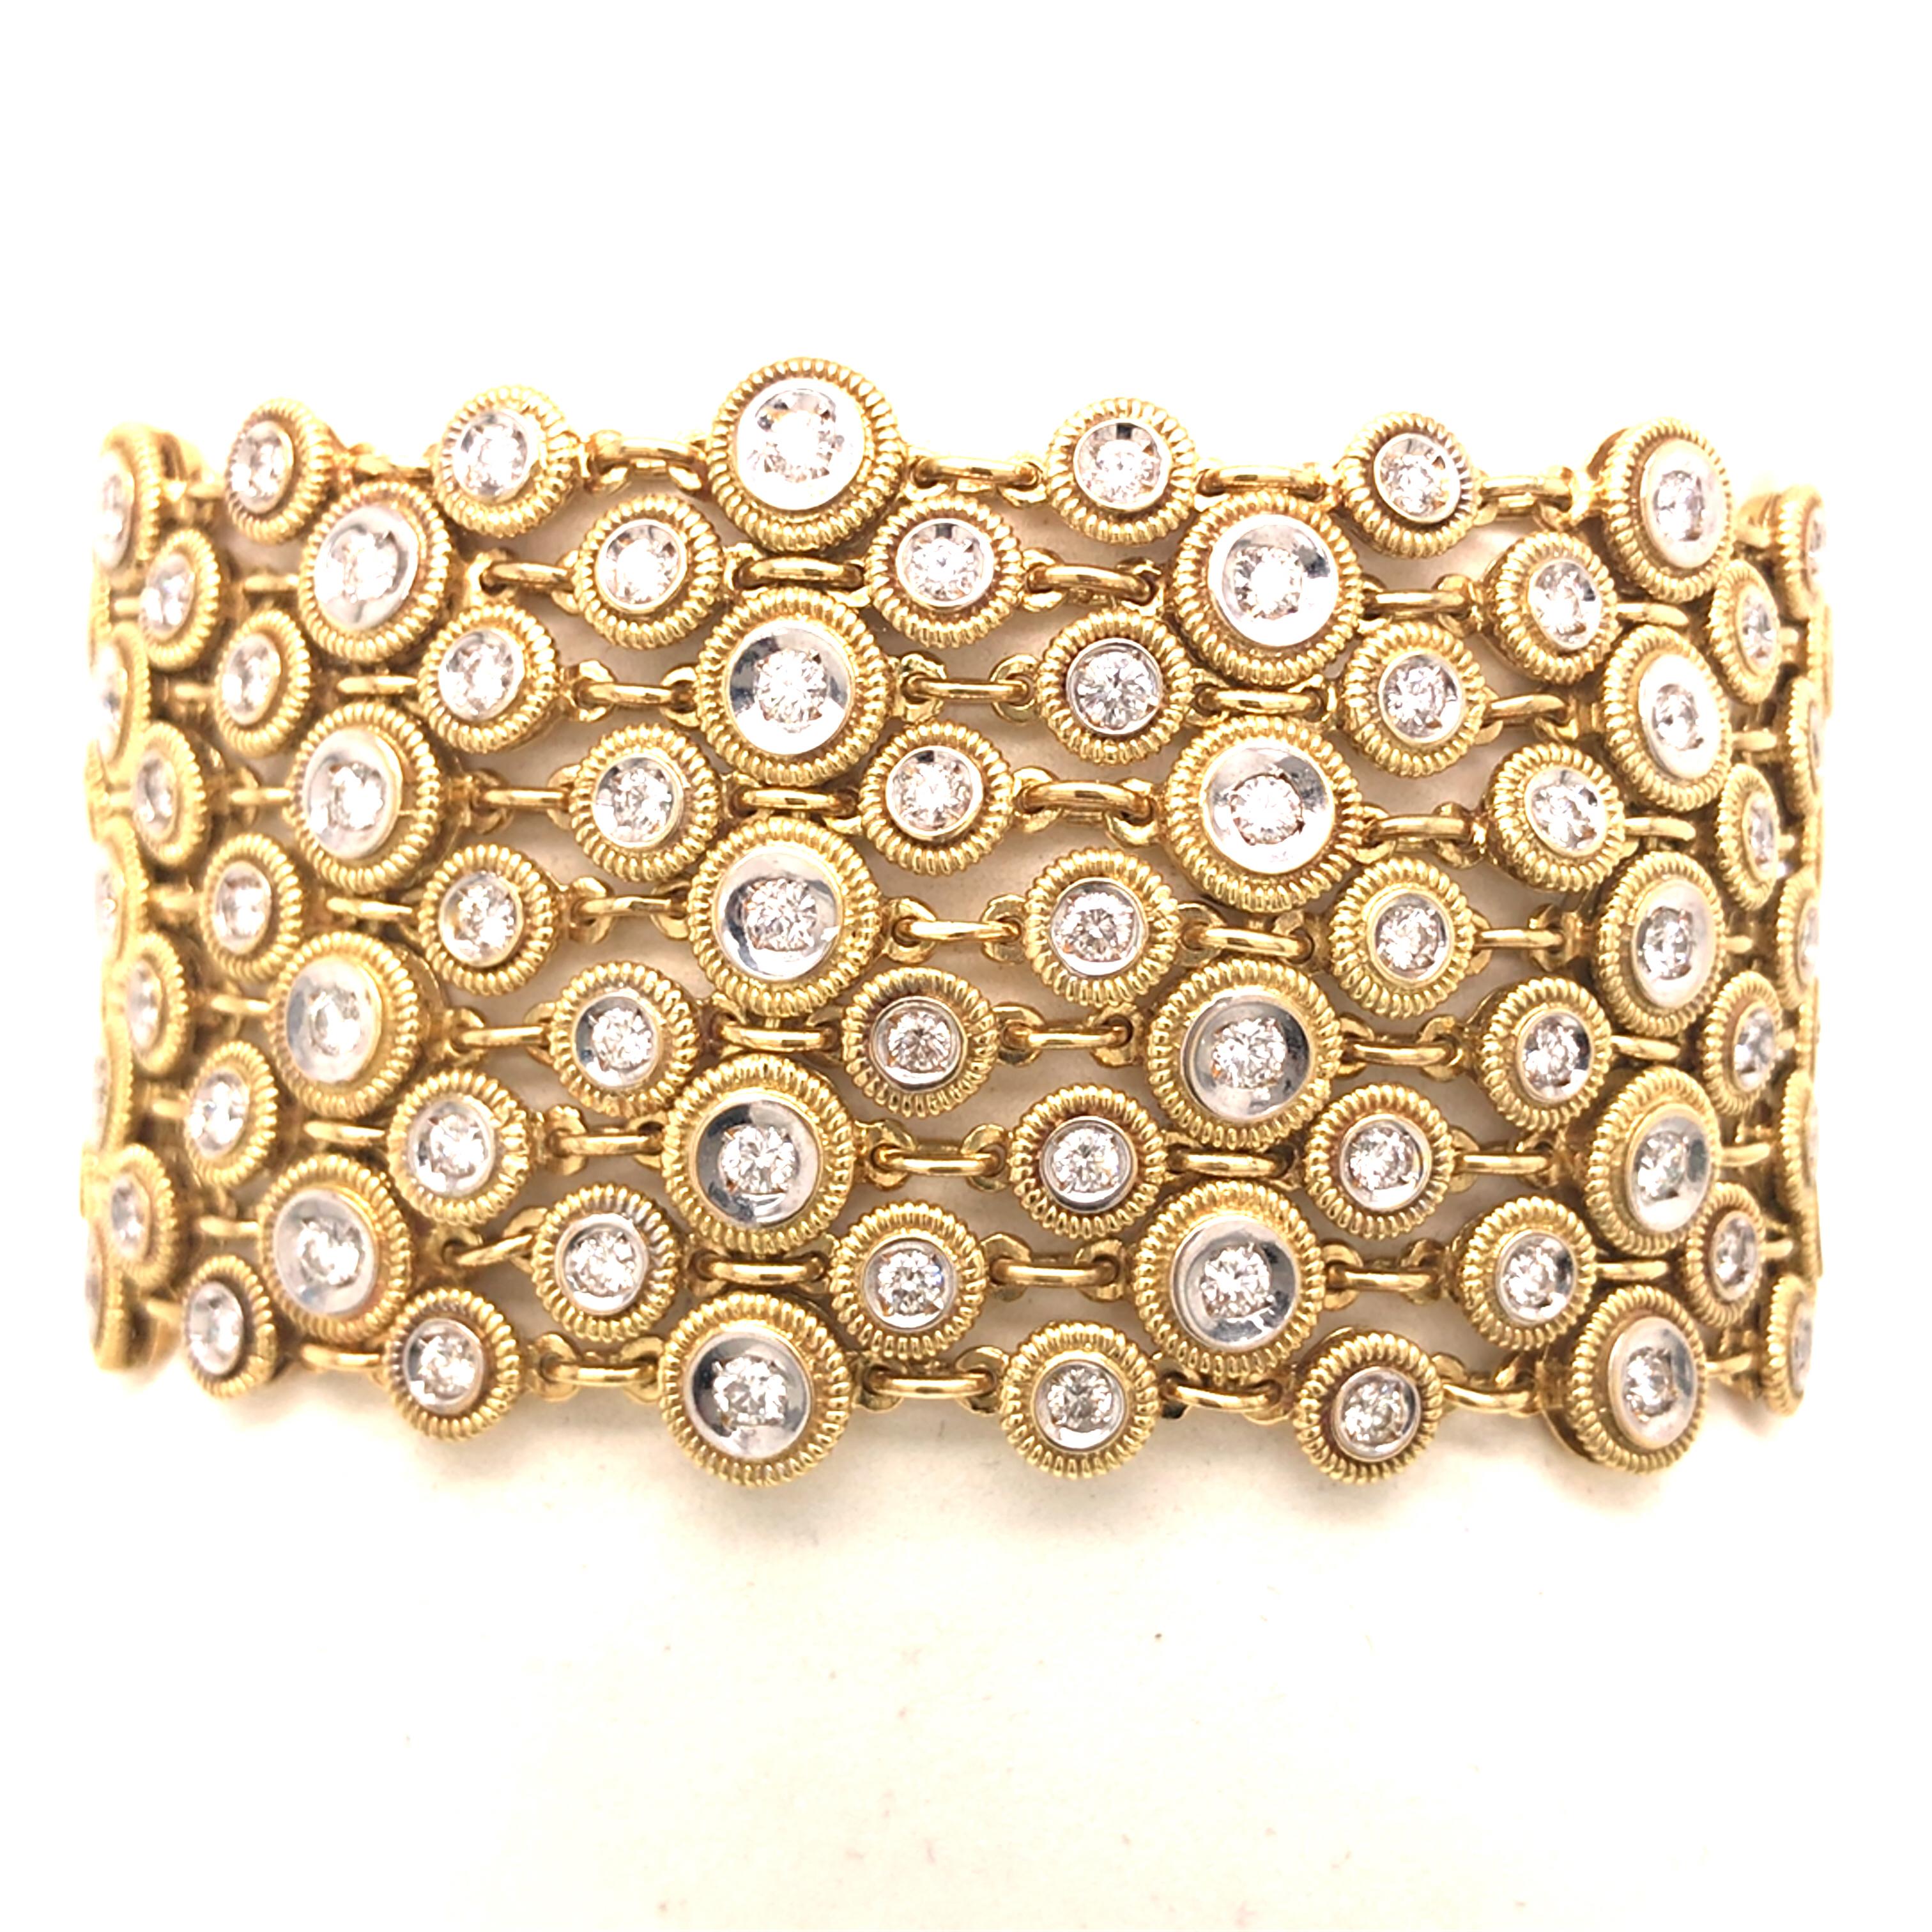 Diamond Wide Geometric Weave Bracelet in 18K Two-Tone Gold.  Round Brilliant Cut Diamonds weighing 8.35 carat total weight, G-H in color and VS in clarity are expertly set.  The Bracelet measures 7 inch in length and 1 3/8 inch in width.  99.6